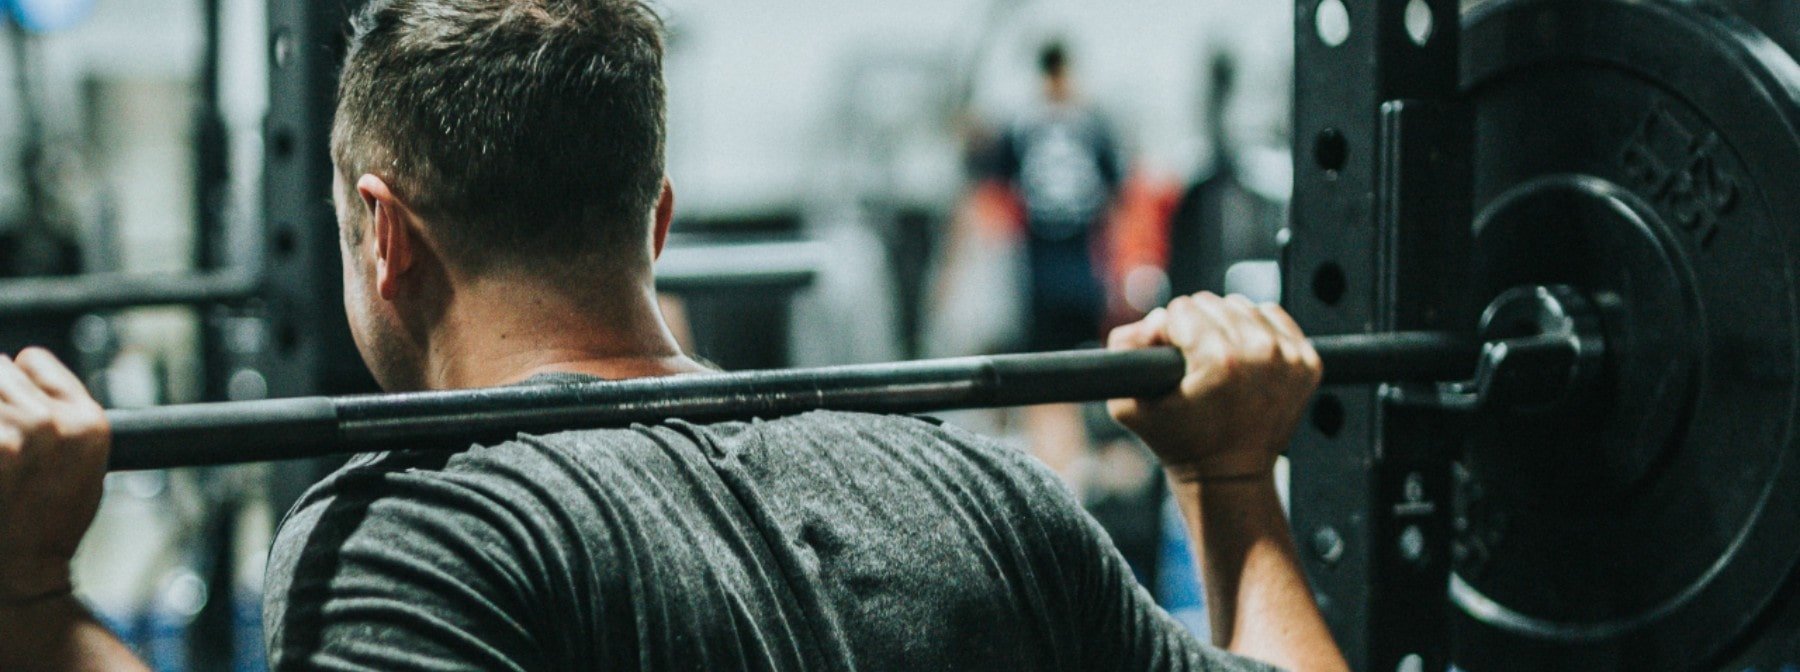 What To Wear In The Gym: A Guide For Men - MYPROTEIN™